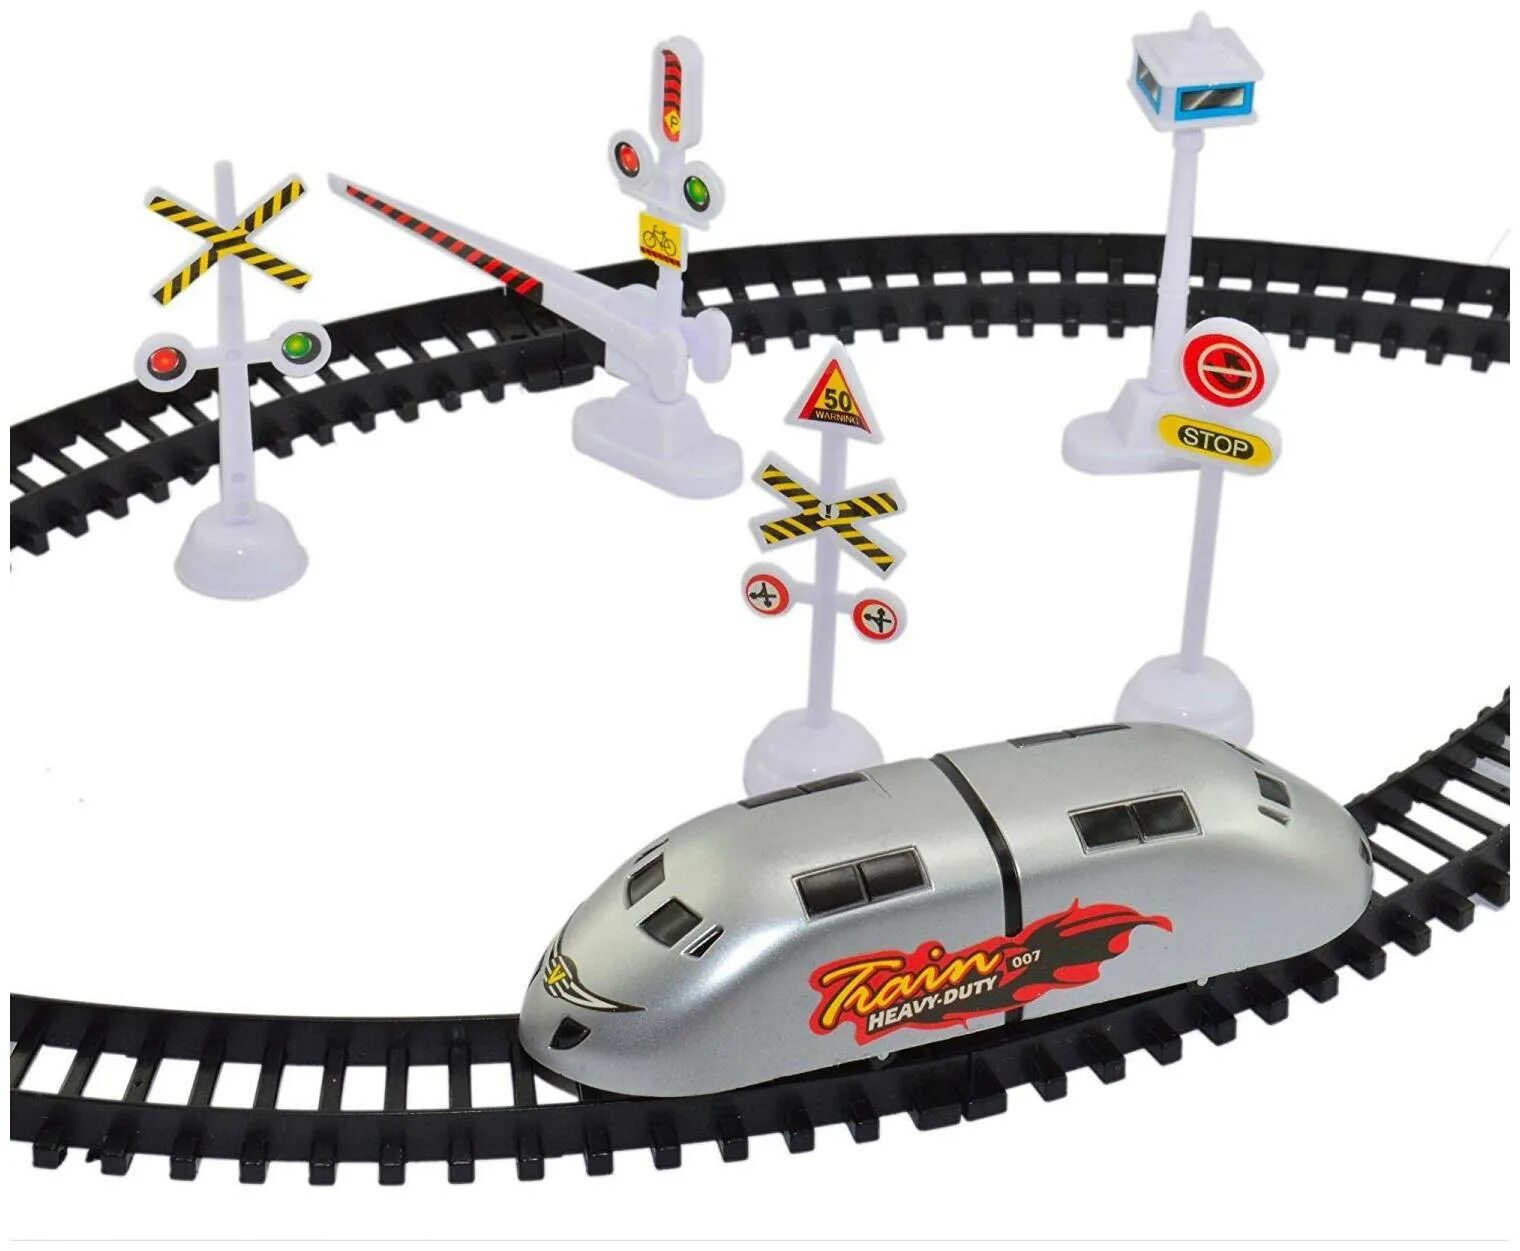 Battery operated. Piko 55273. Игрушка City track Set. Игрушка City track Set Dickie. Фигурка из Bullet Train.